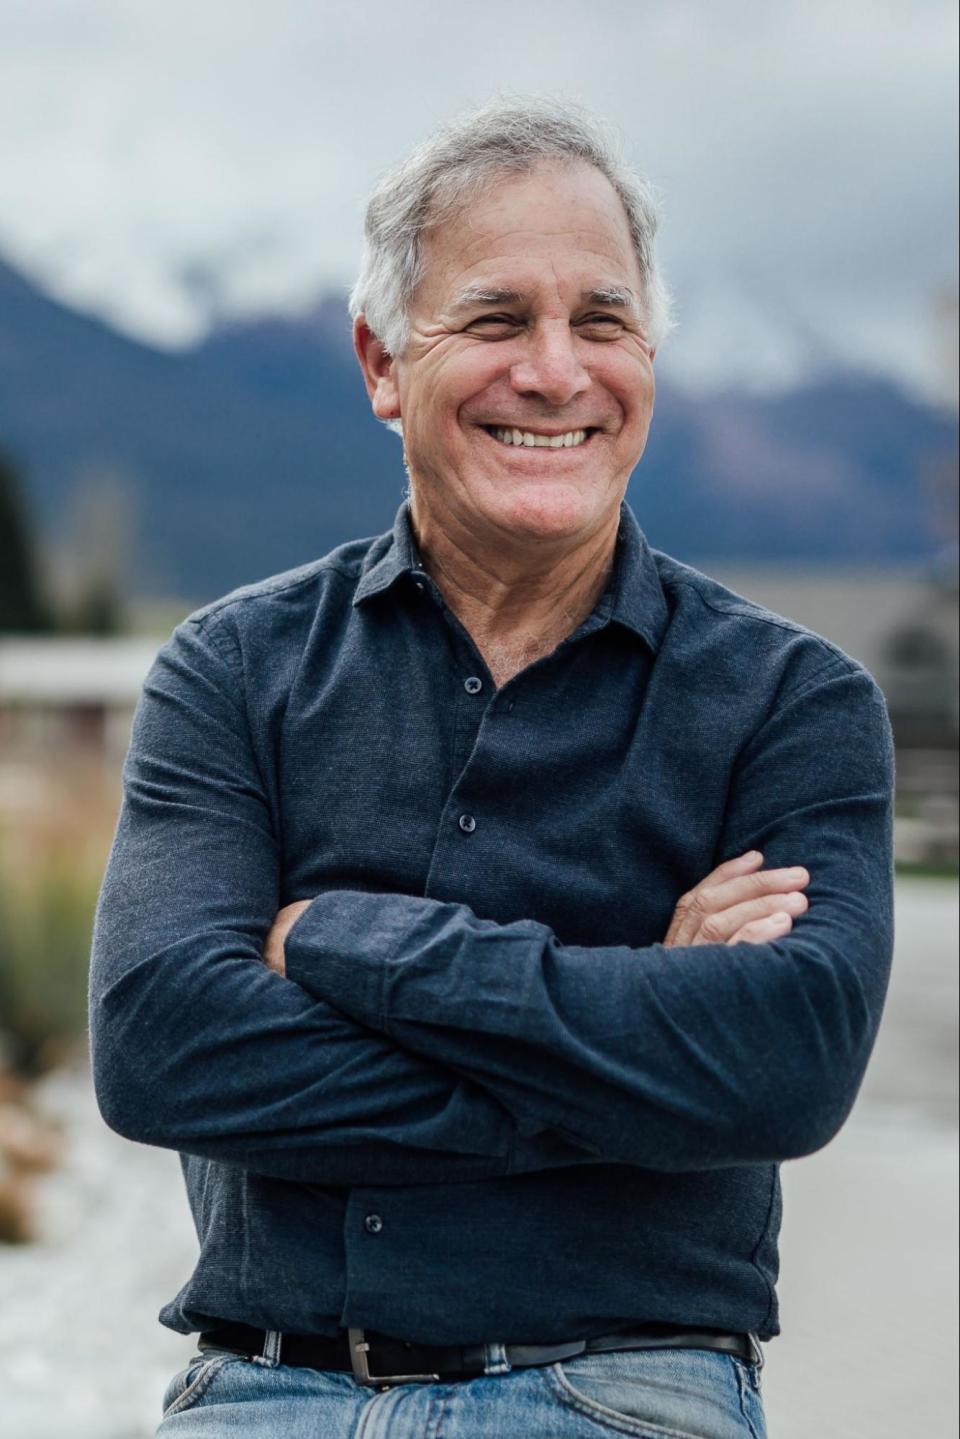 Gary Hirshberg, co-founder of Stonyfield, says he’s never seen a generation so motivated to “do good” at work.<span class="copyright">Stonyfield</span>